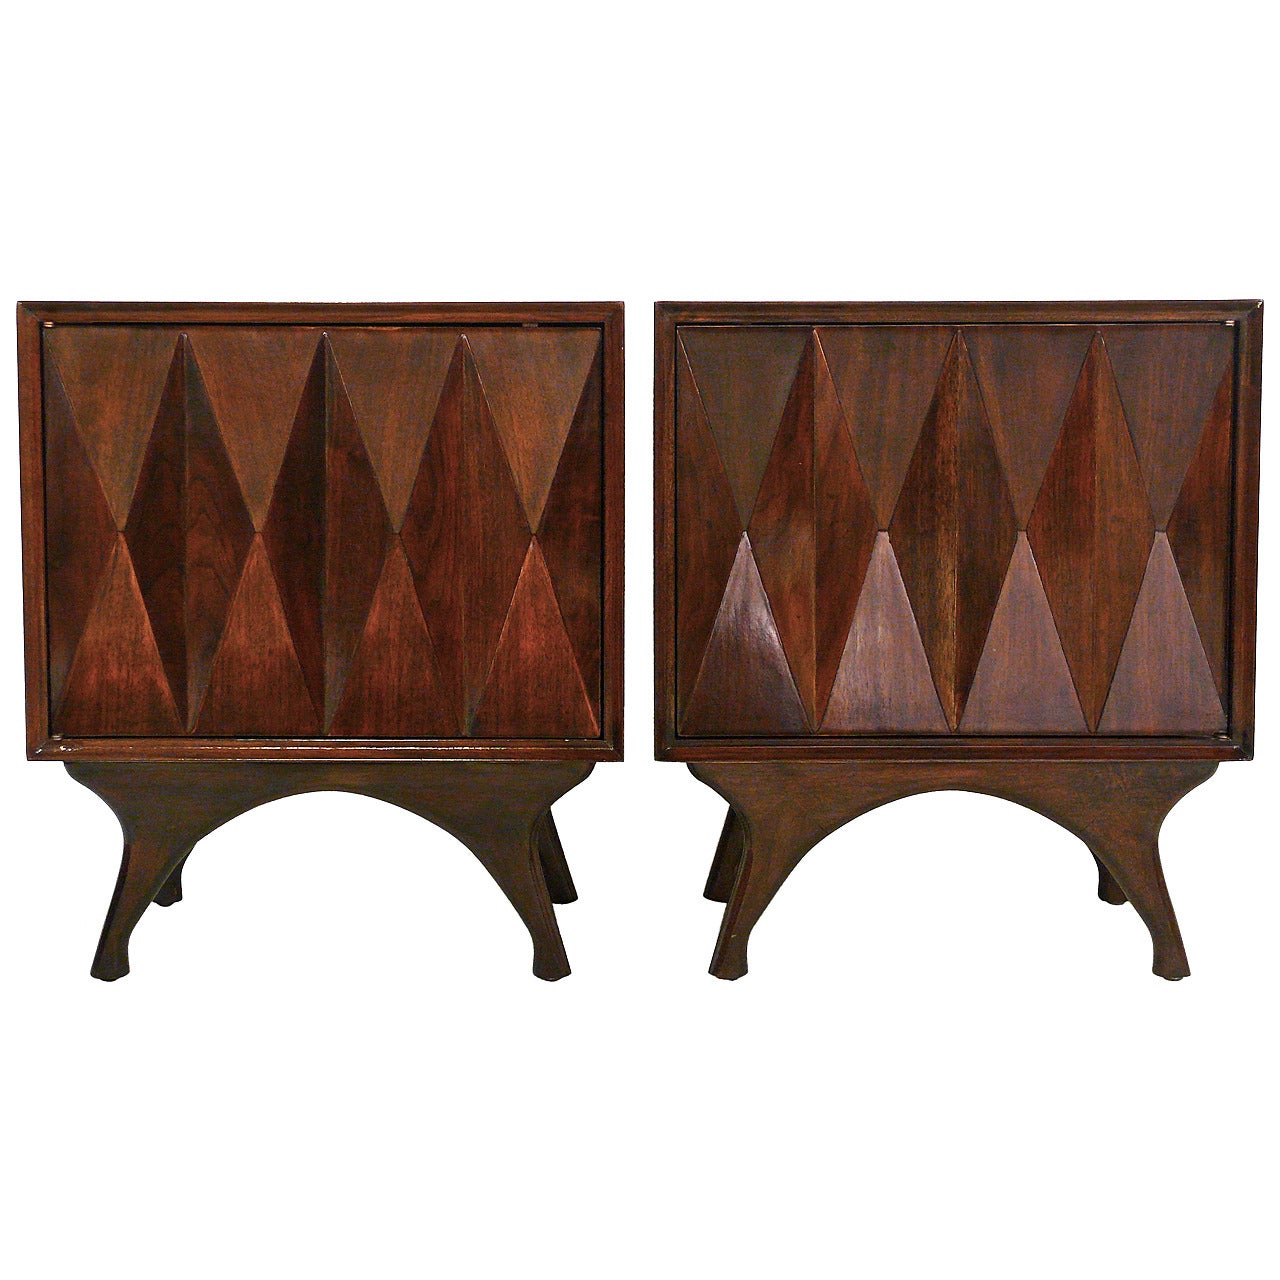 Pair of Diamond Front End Tables